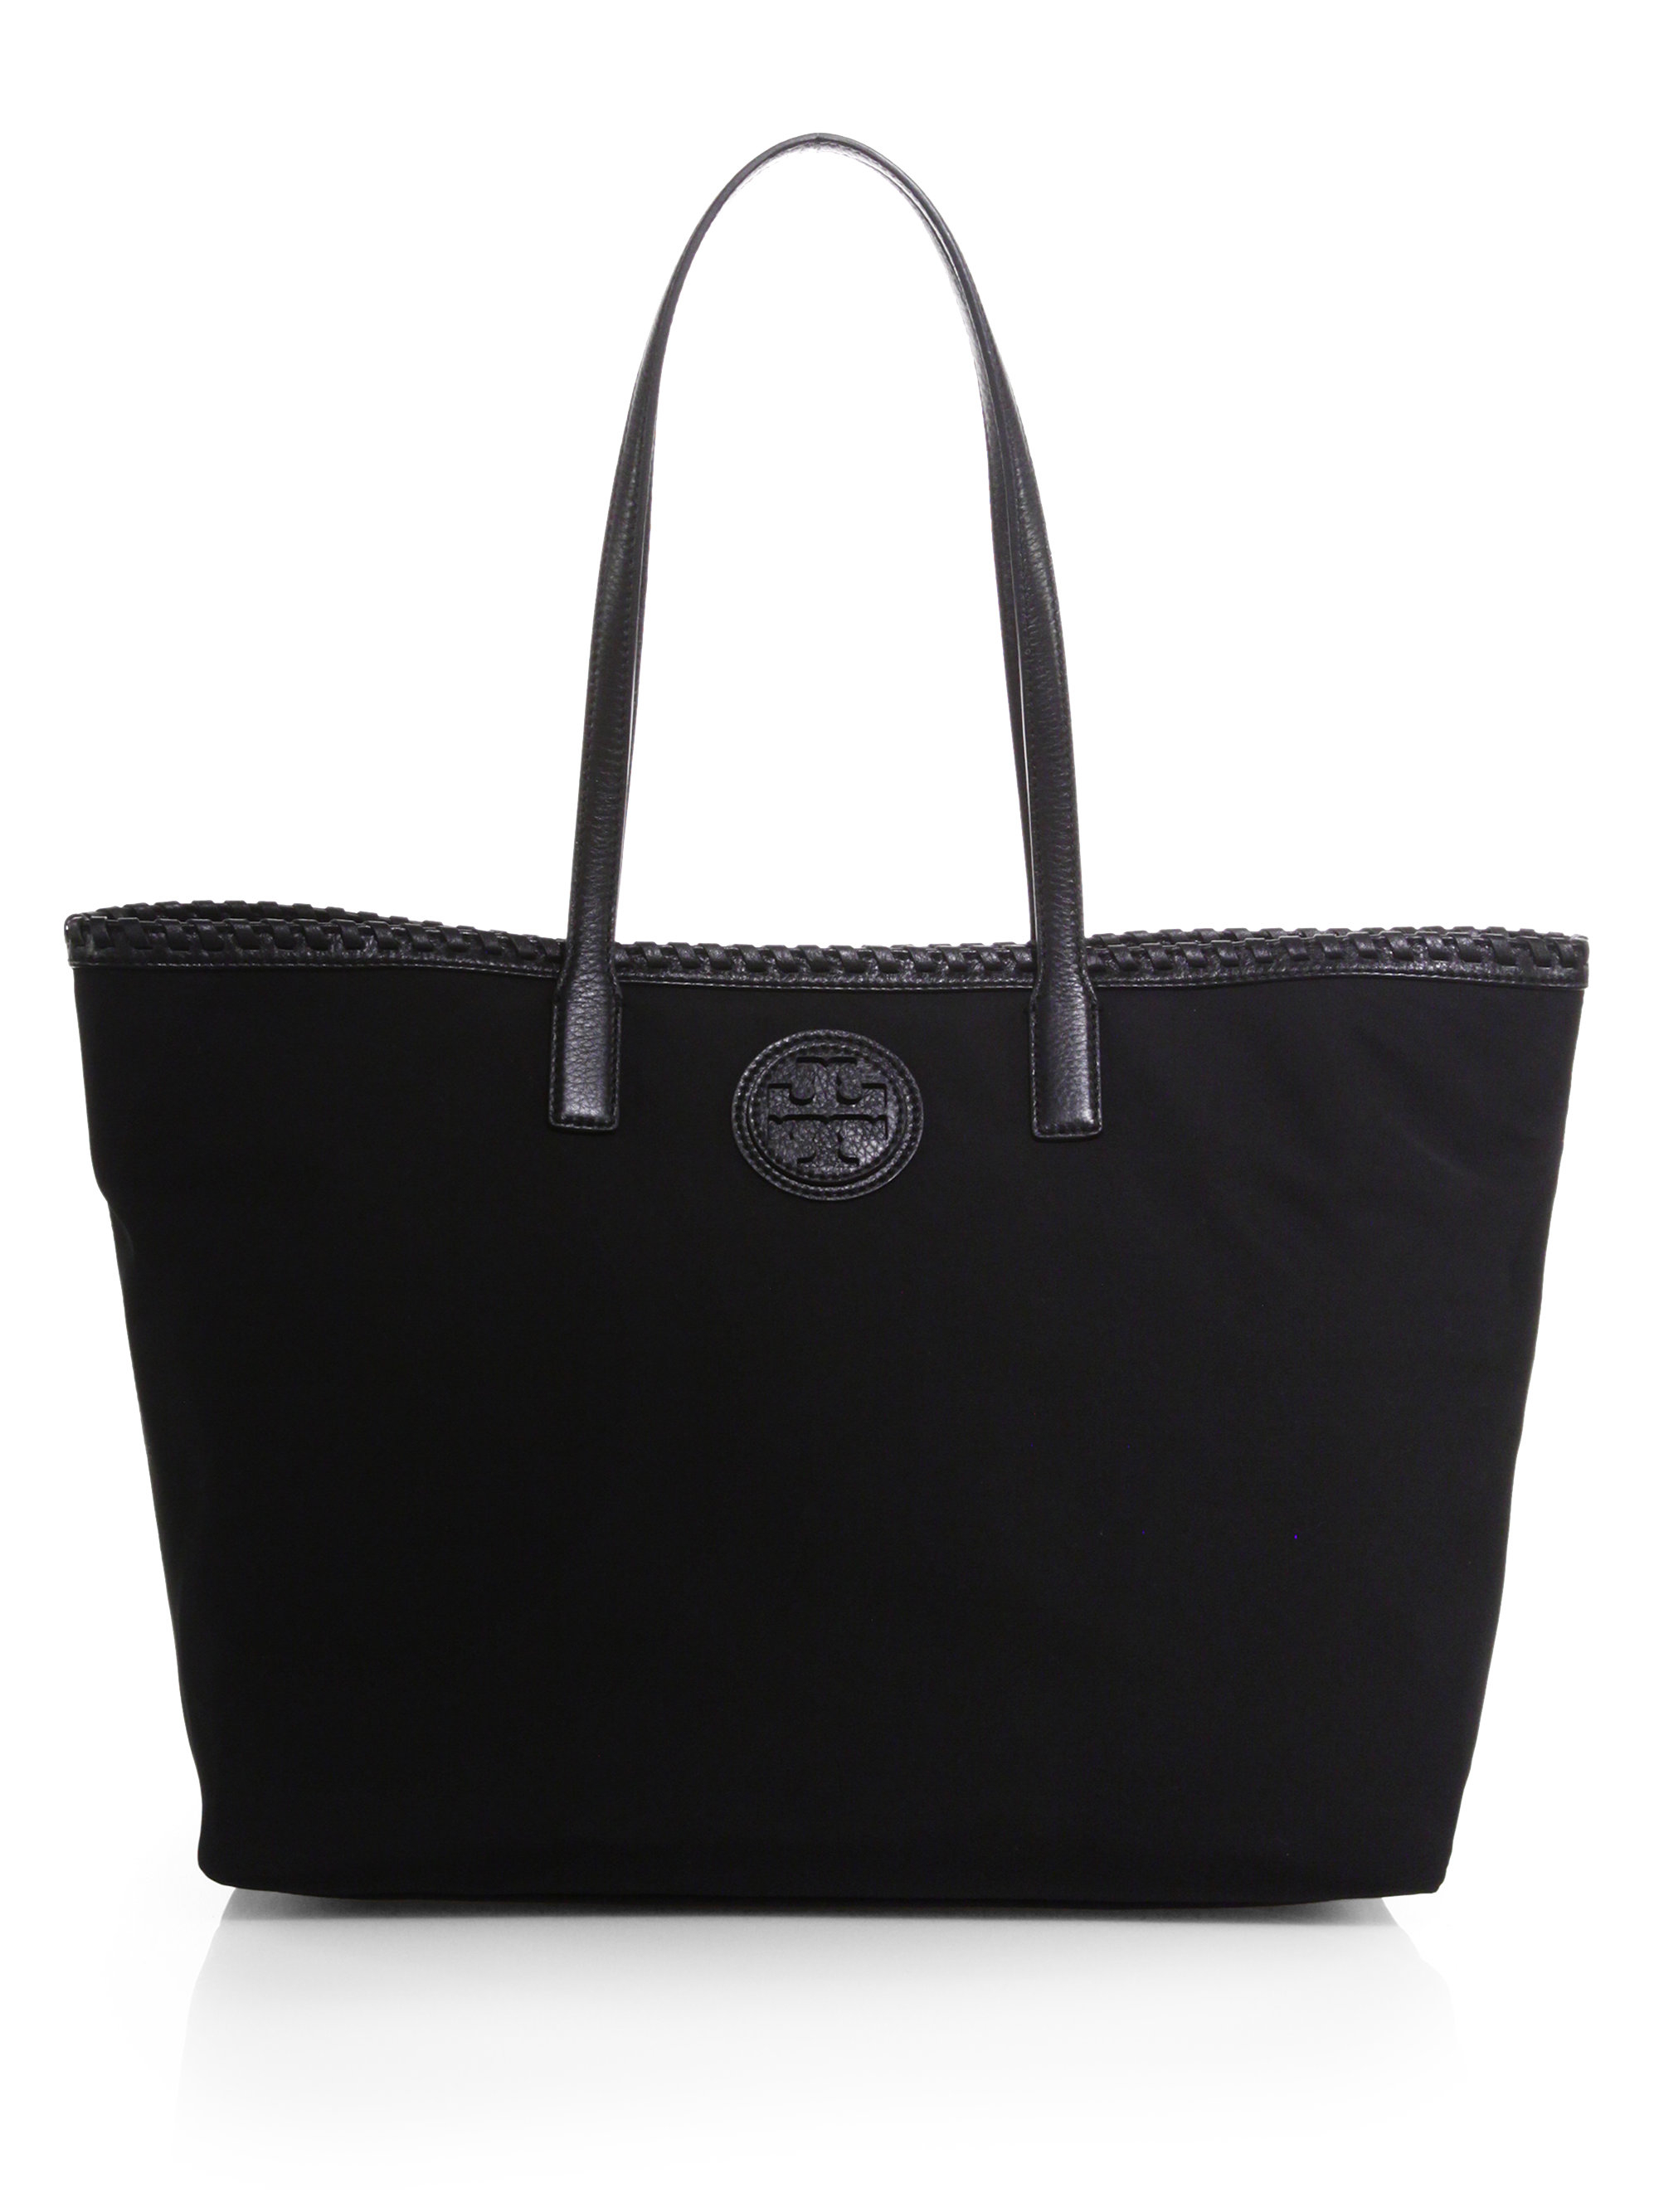 Tory Burch Marion East-West Nylon Tote in Black - Lyst